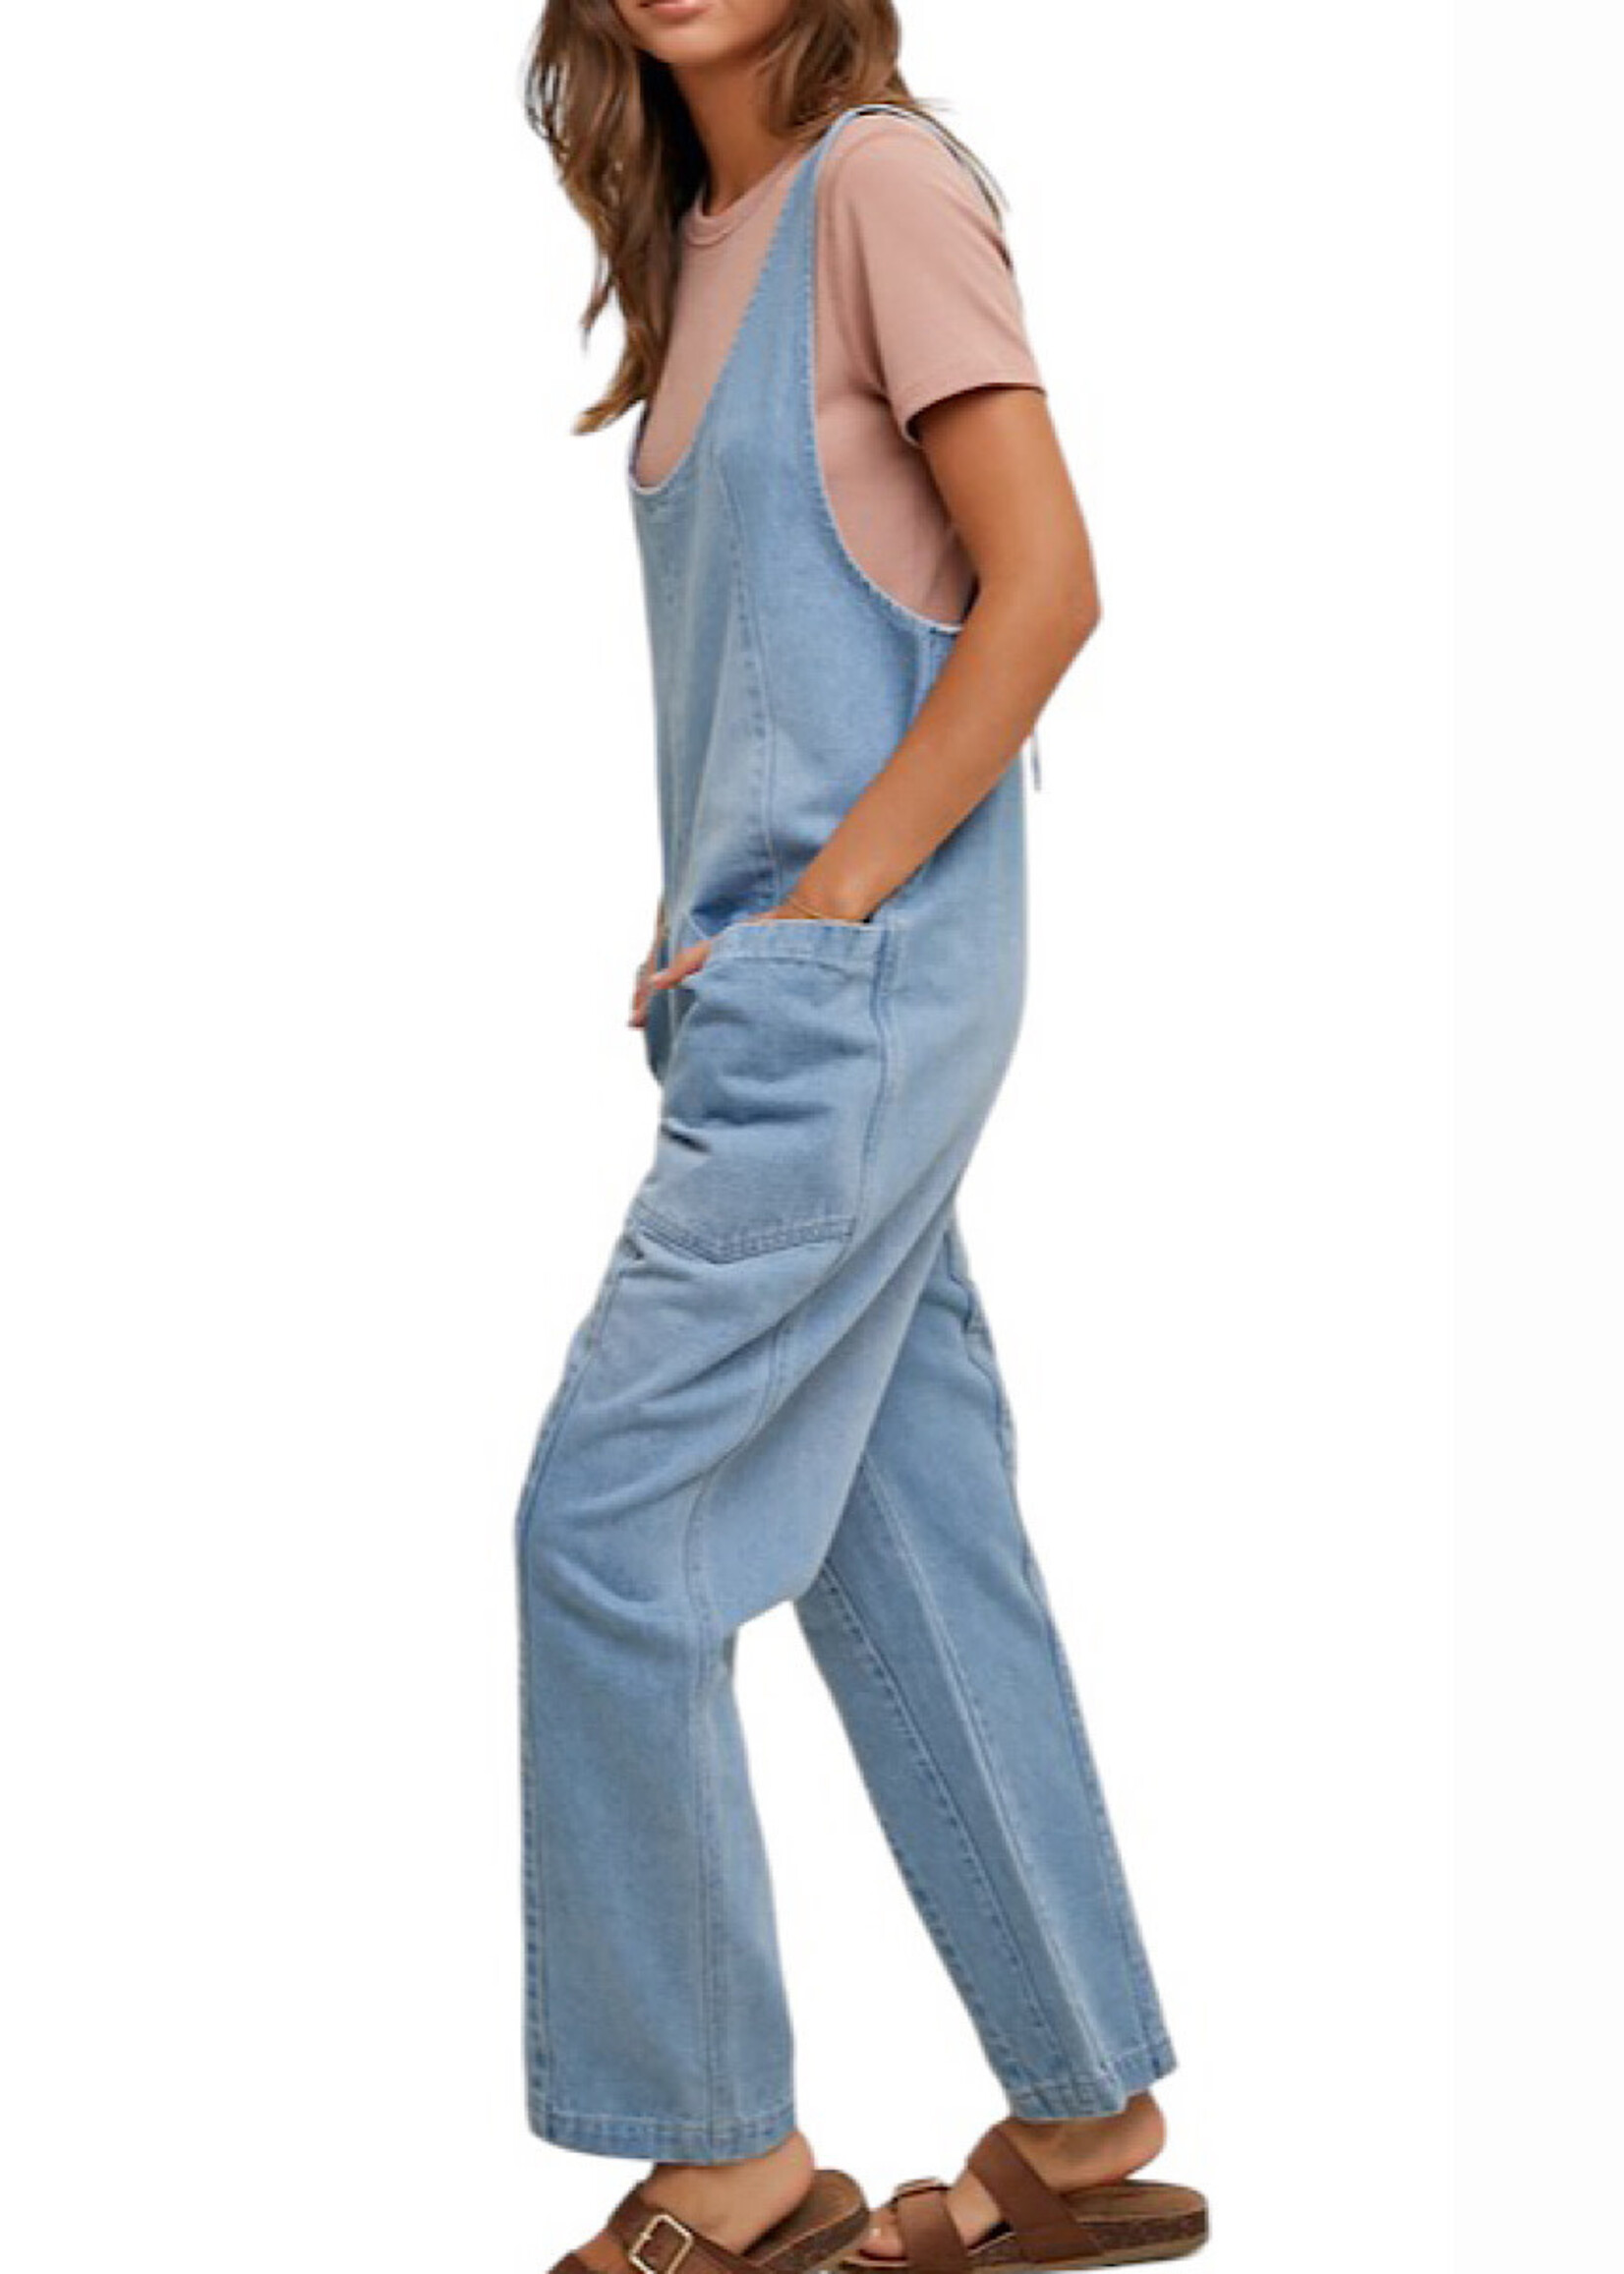 Denim Overall with Open Back Detail